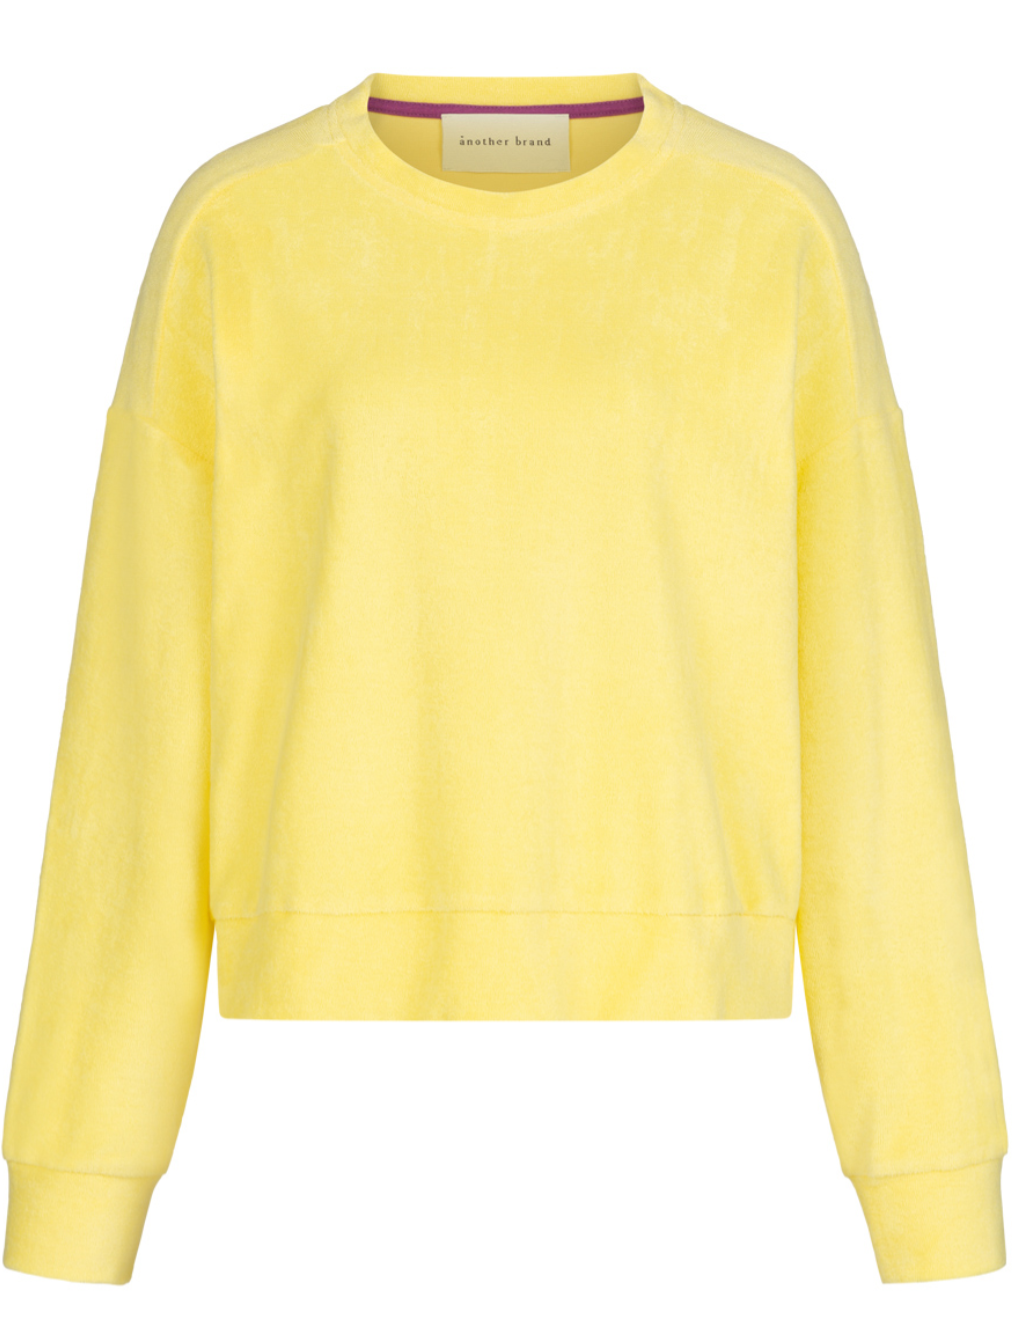 Limelight Sweatshirt Terry  - another brand